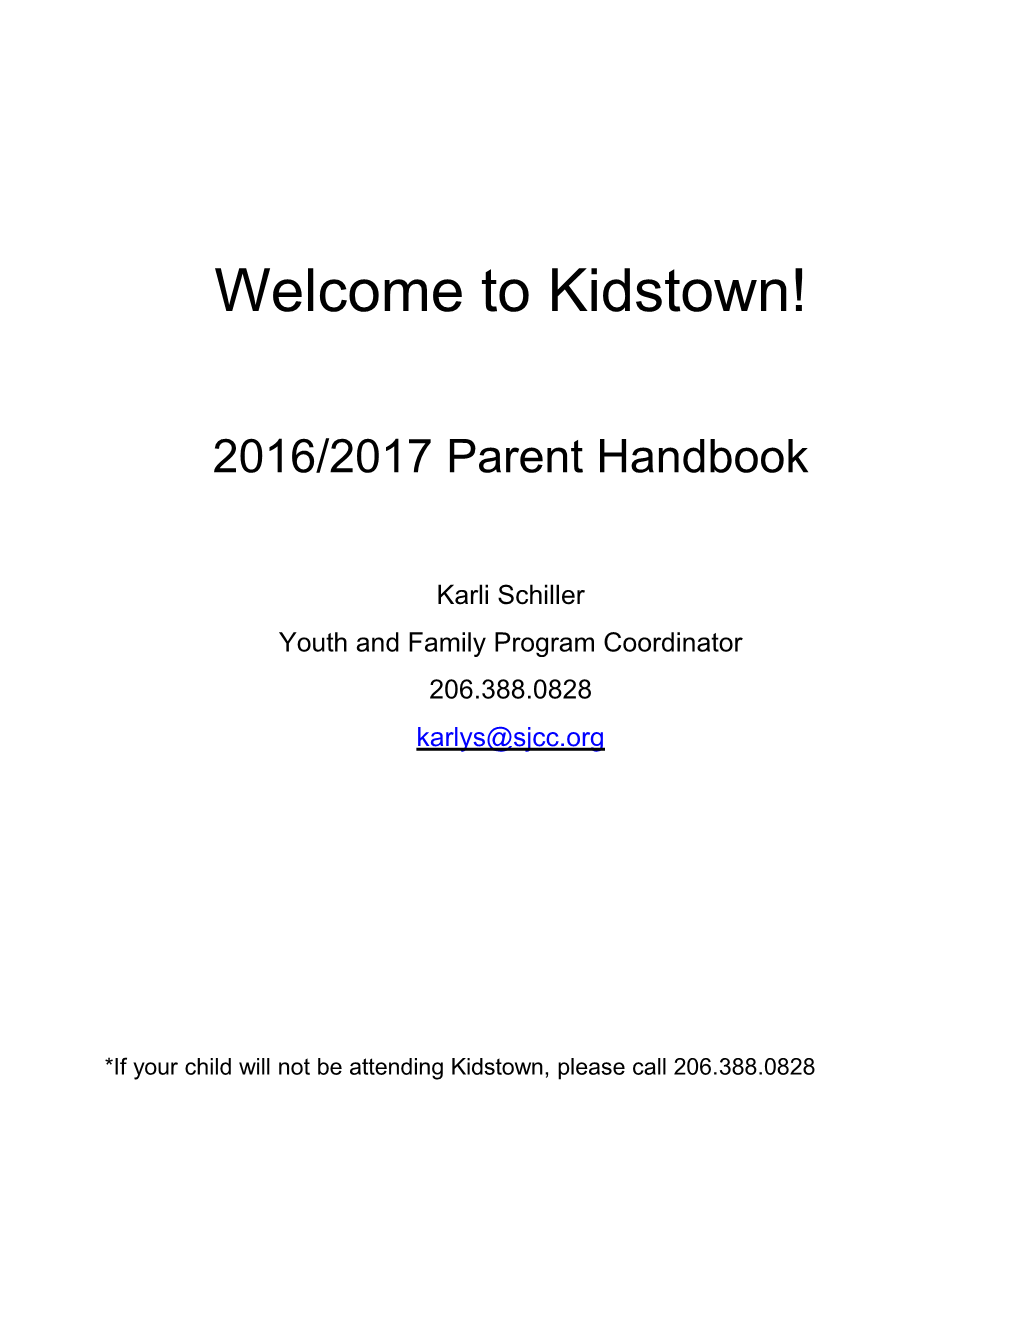 Welcome to Kidstown!